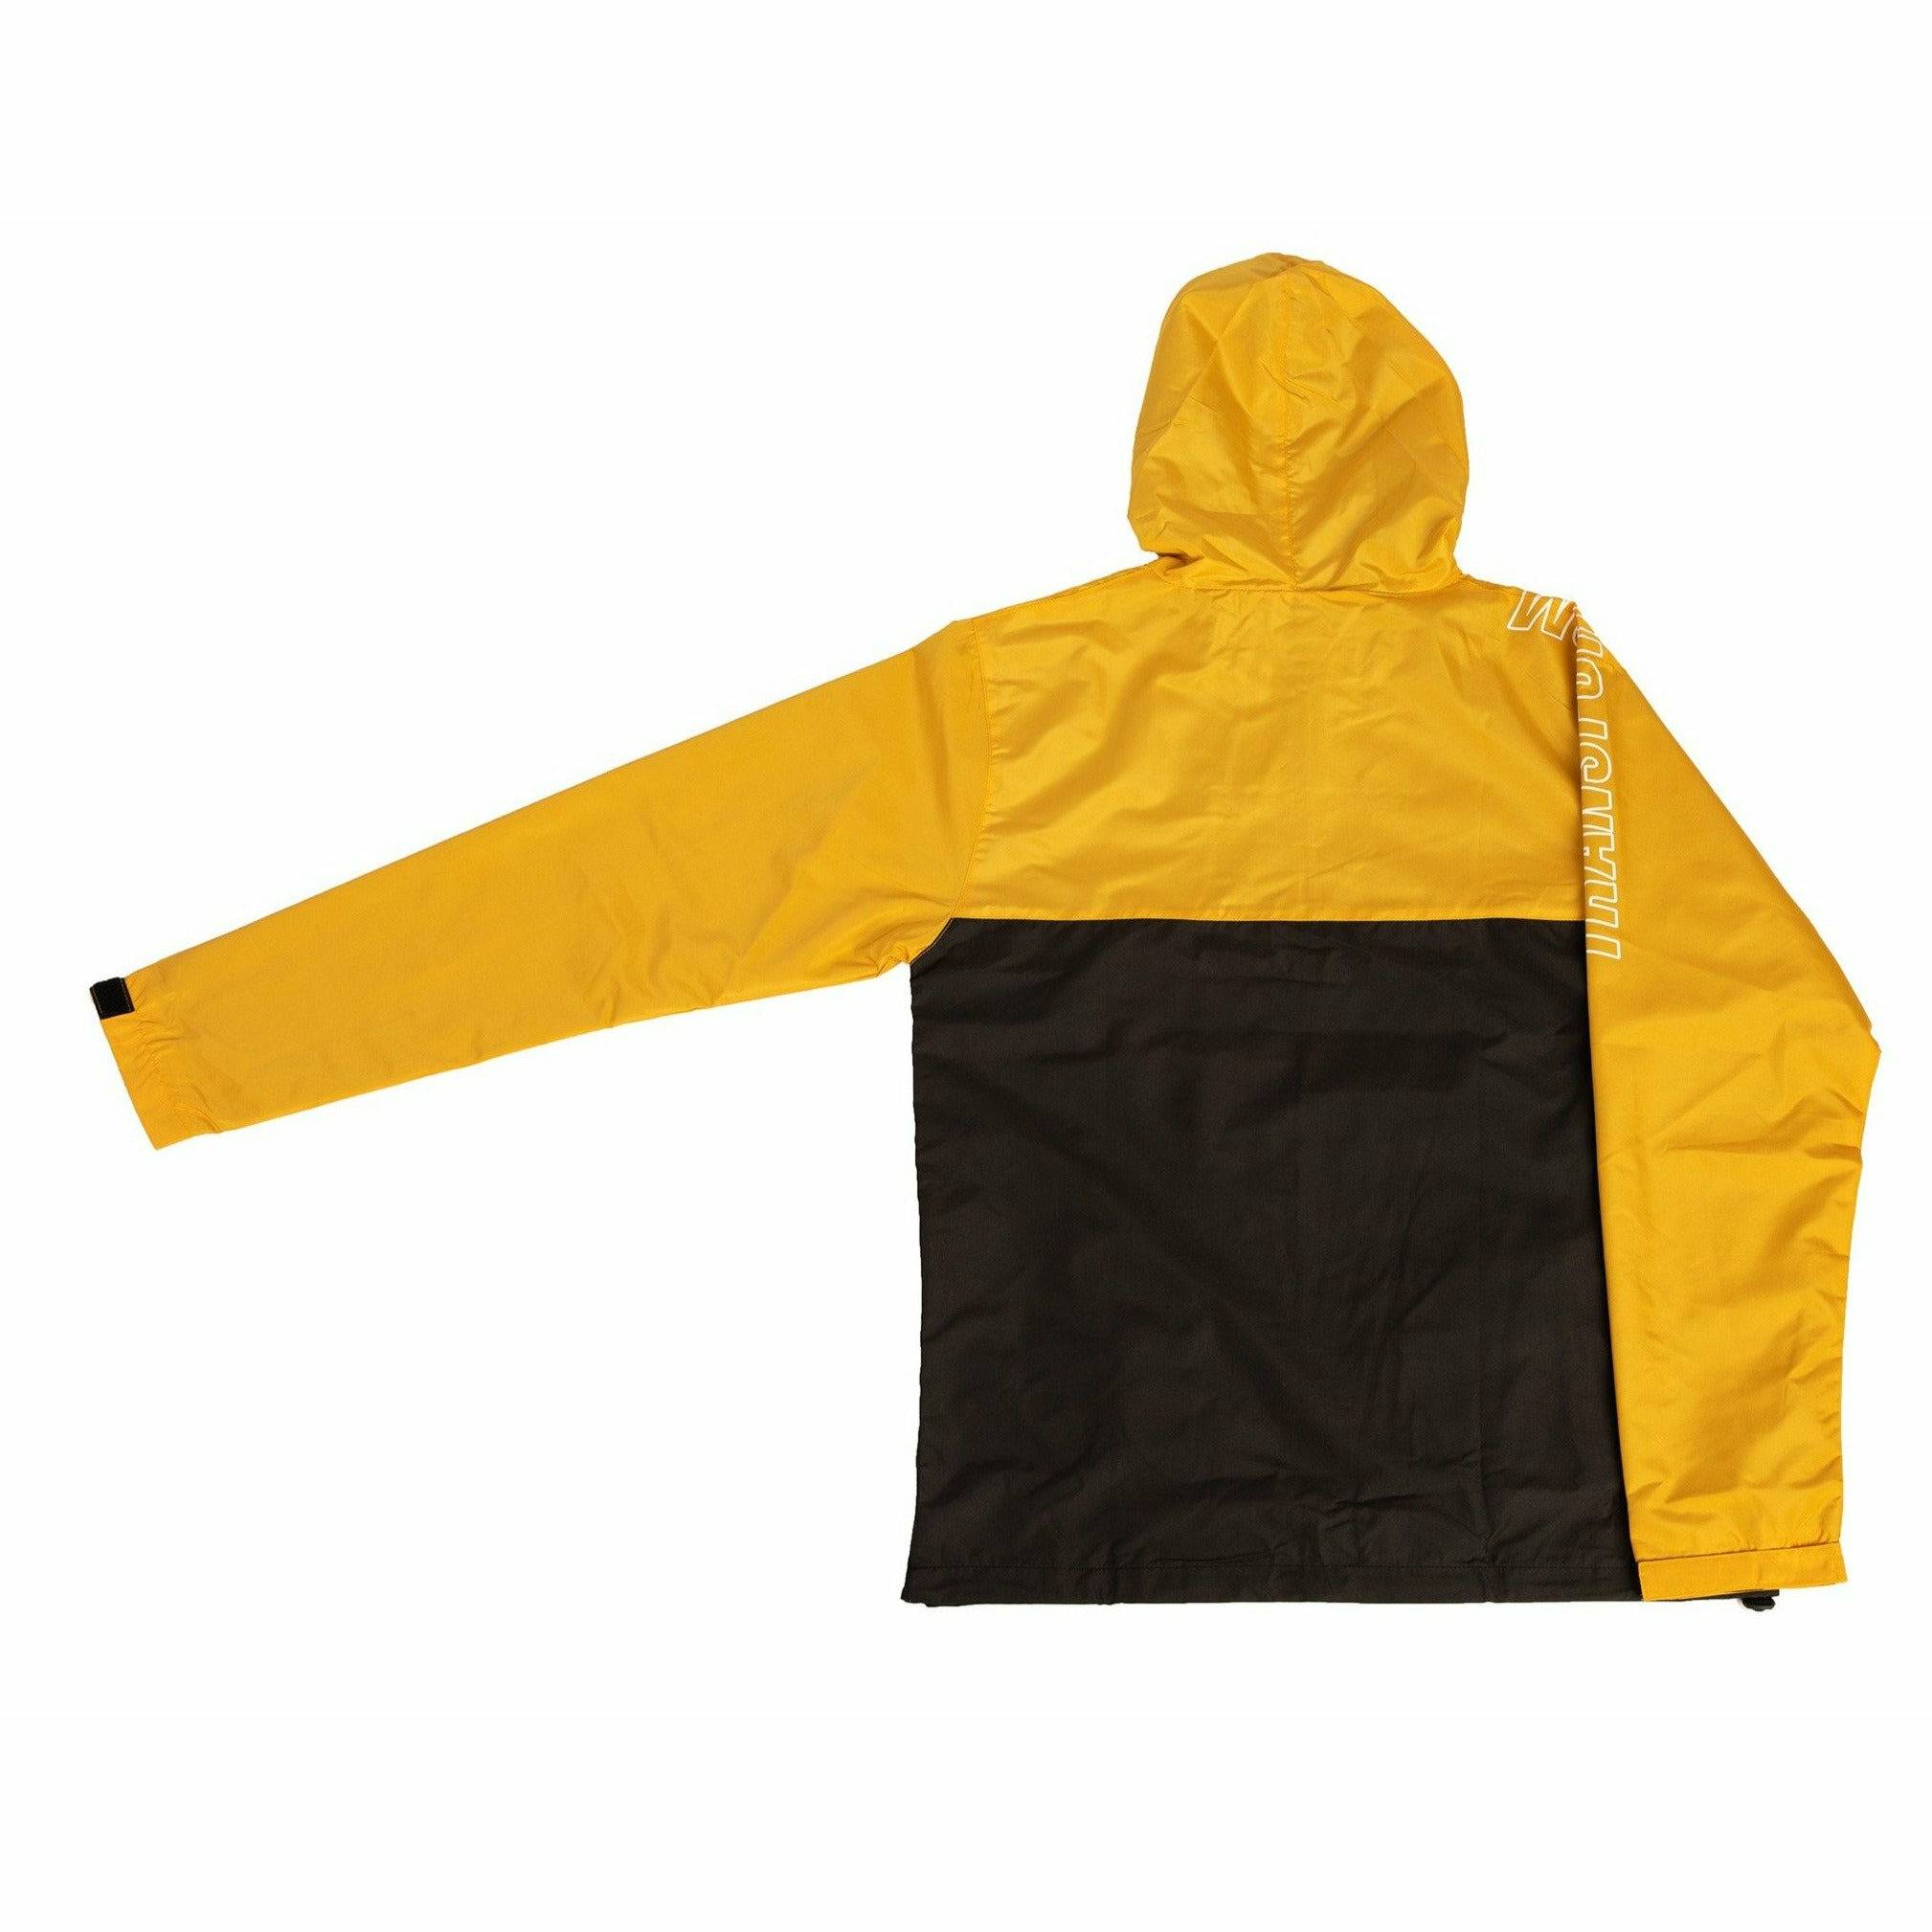 Goldenrod The Fast Text Jacket Gold/Black